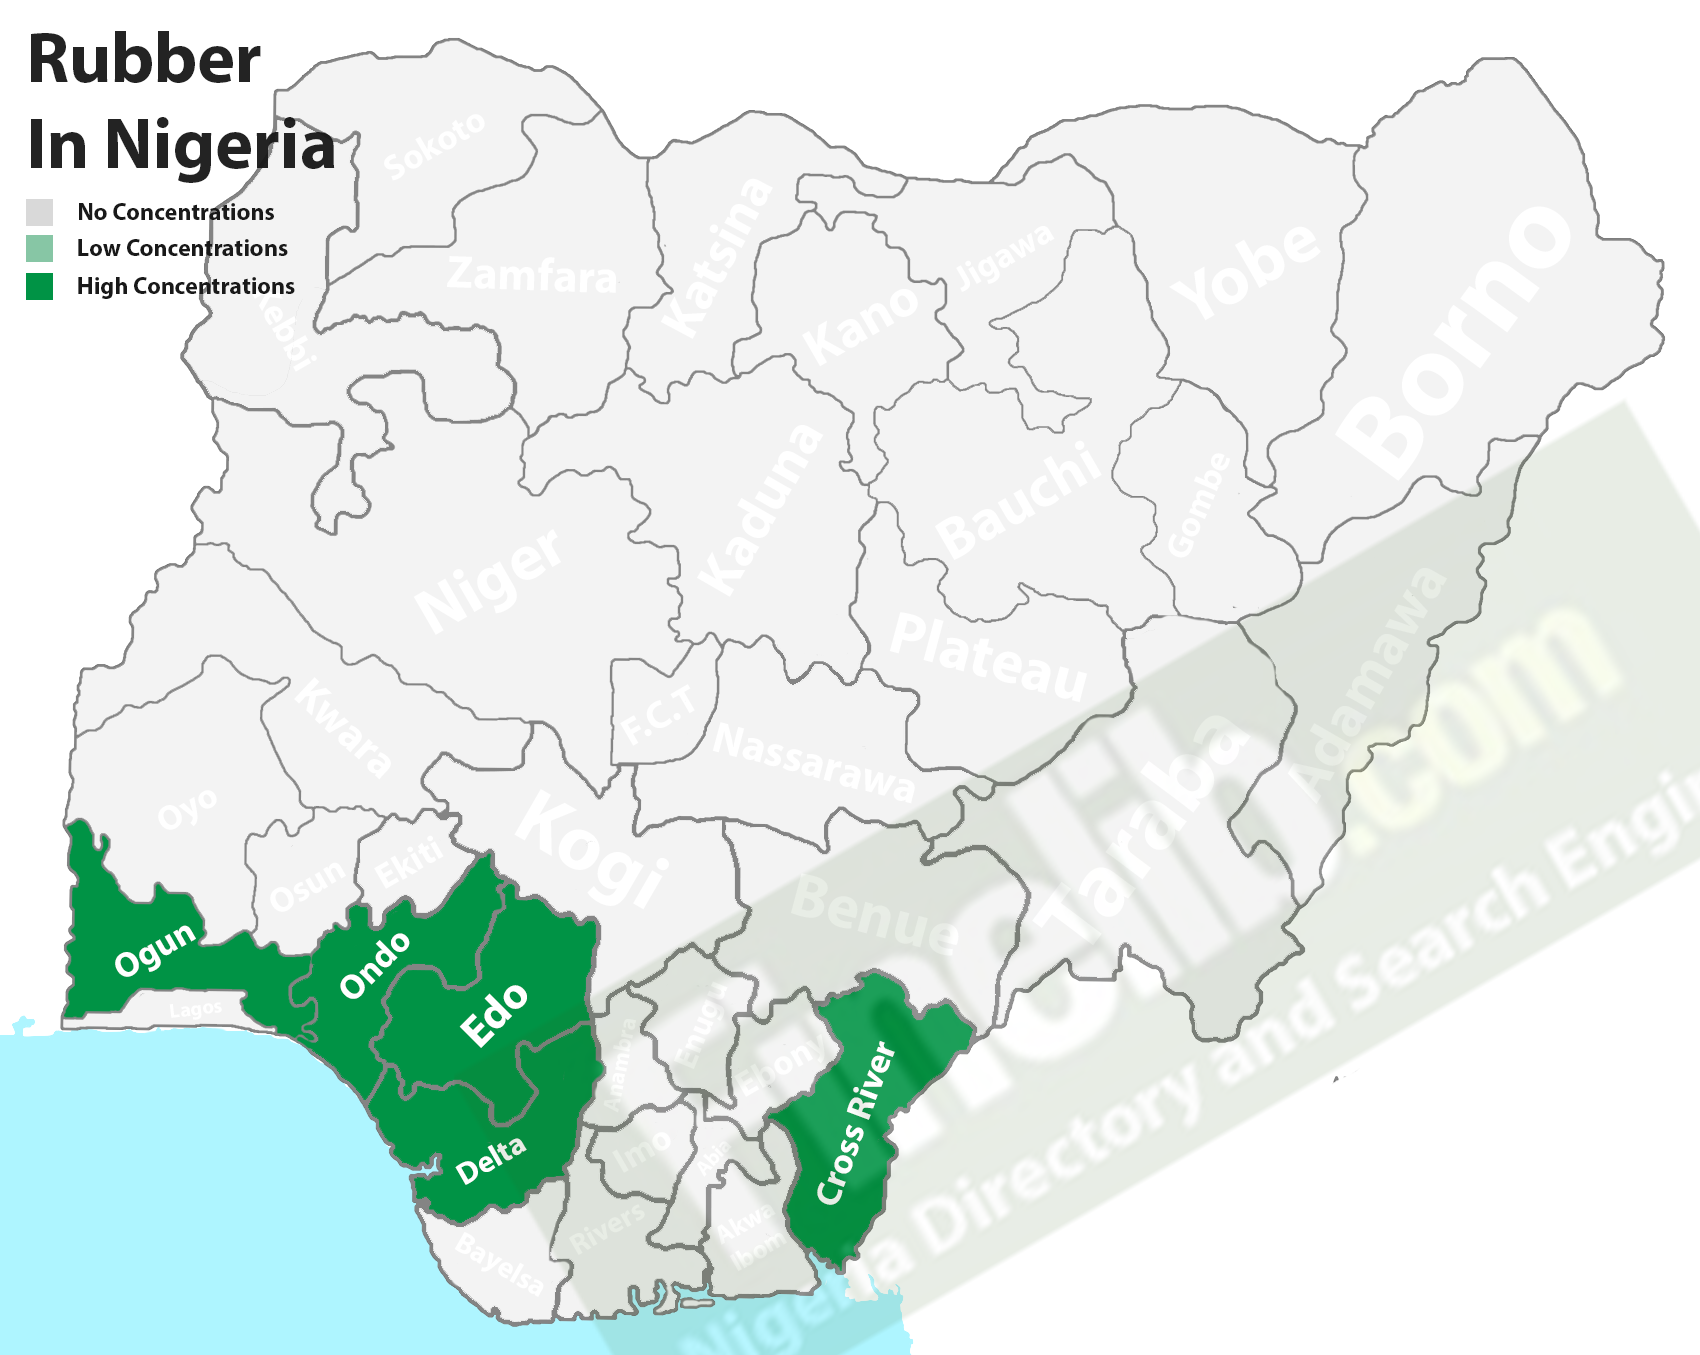 natural rubber producing states in Nigeria